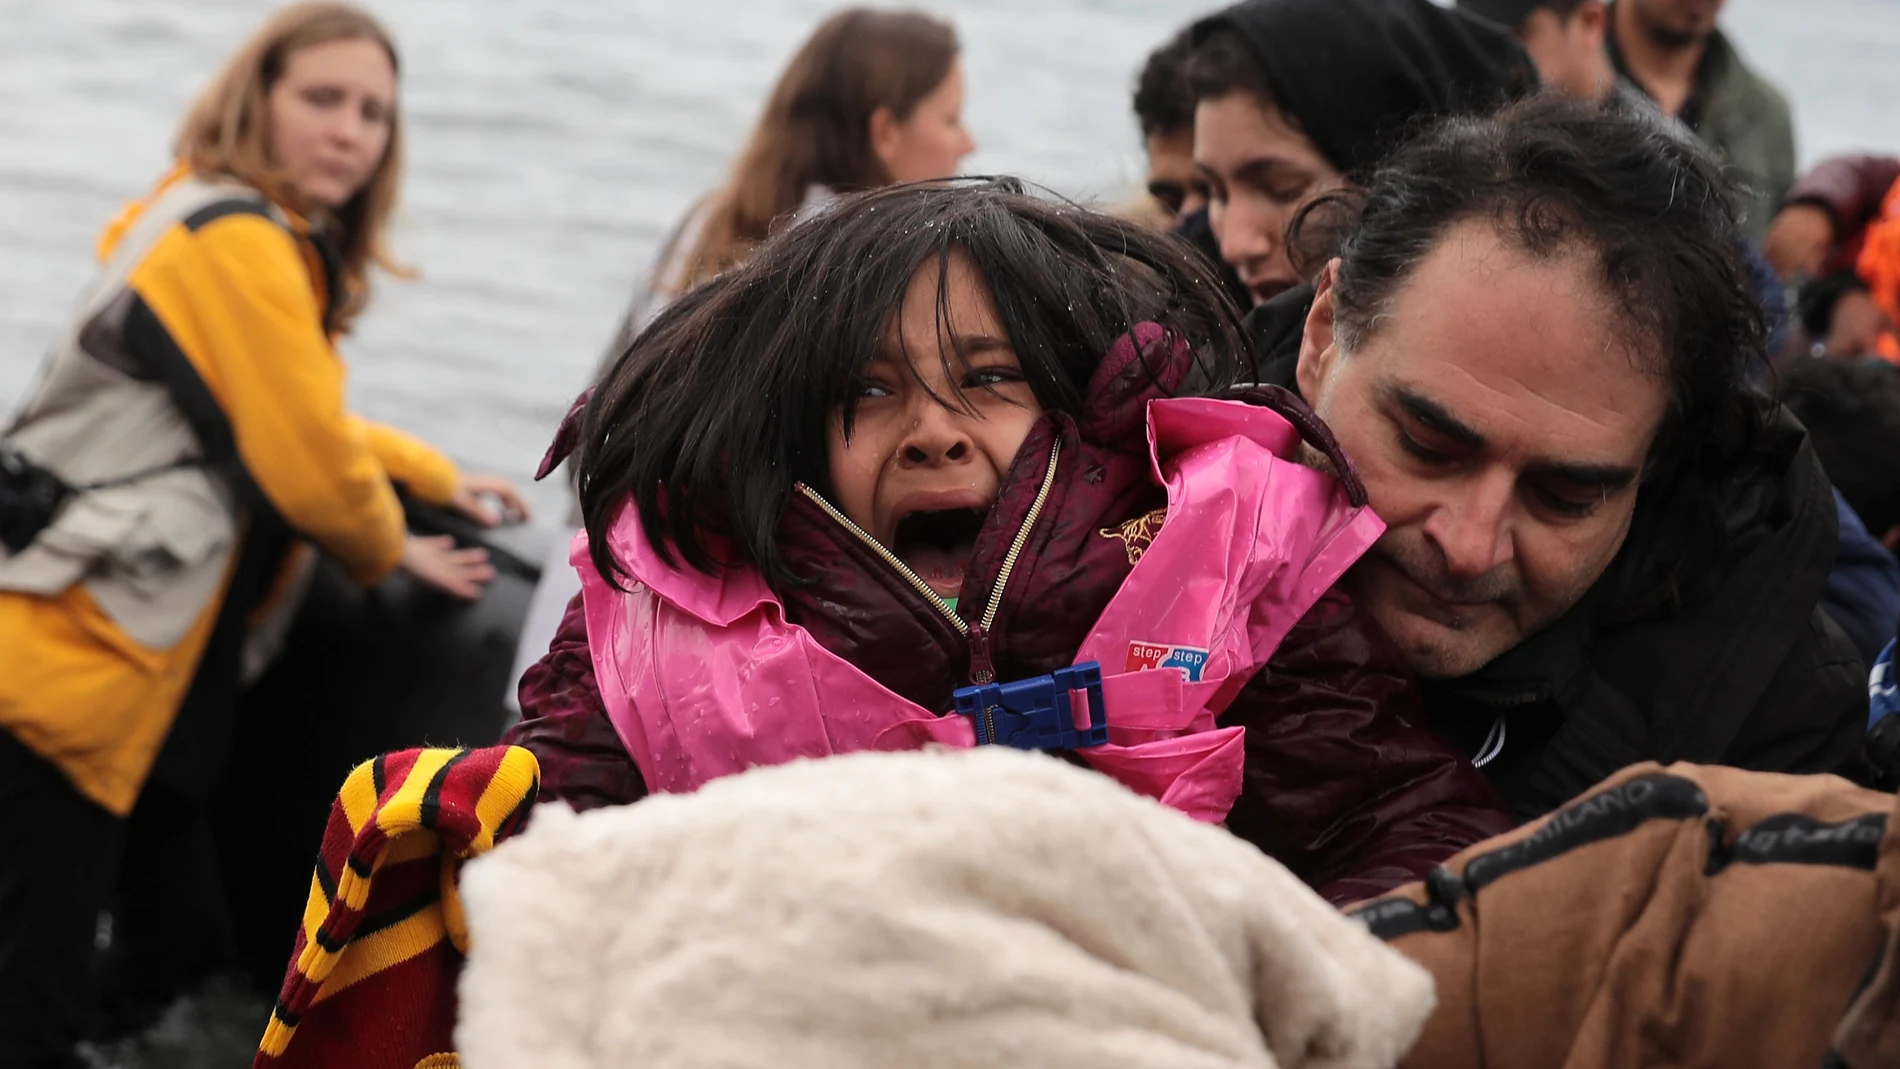 A girl reacts as migrants from Afghanistan arrive on a dinghy on a beach near the village of Skala Sikamias on the island of Lesbos, Greece, February 28, 2020. REUTERS/Costas Baltas